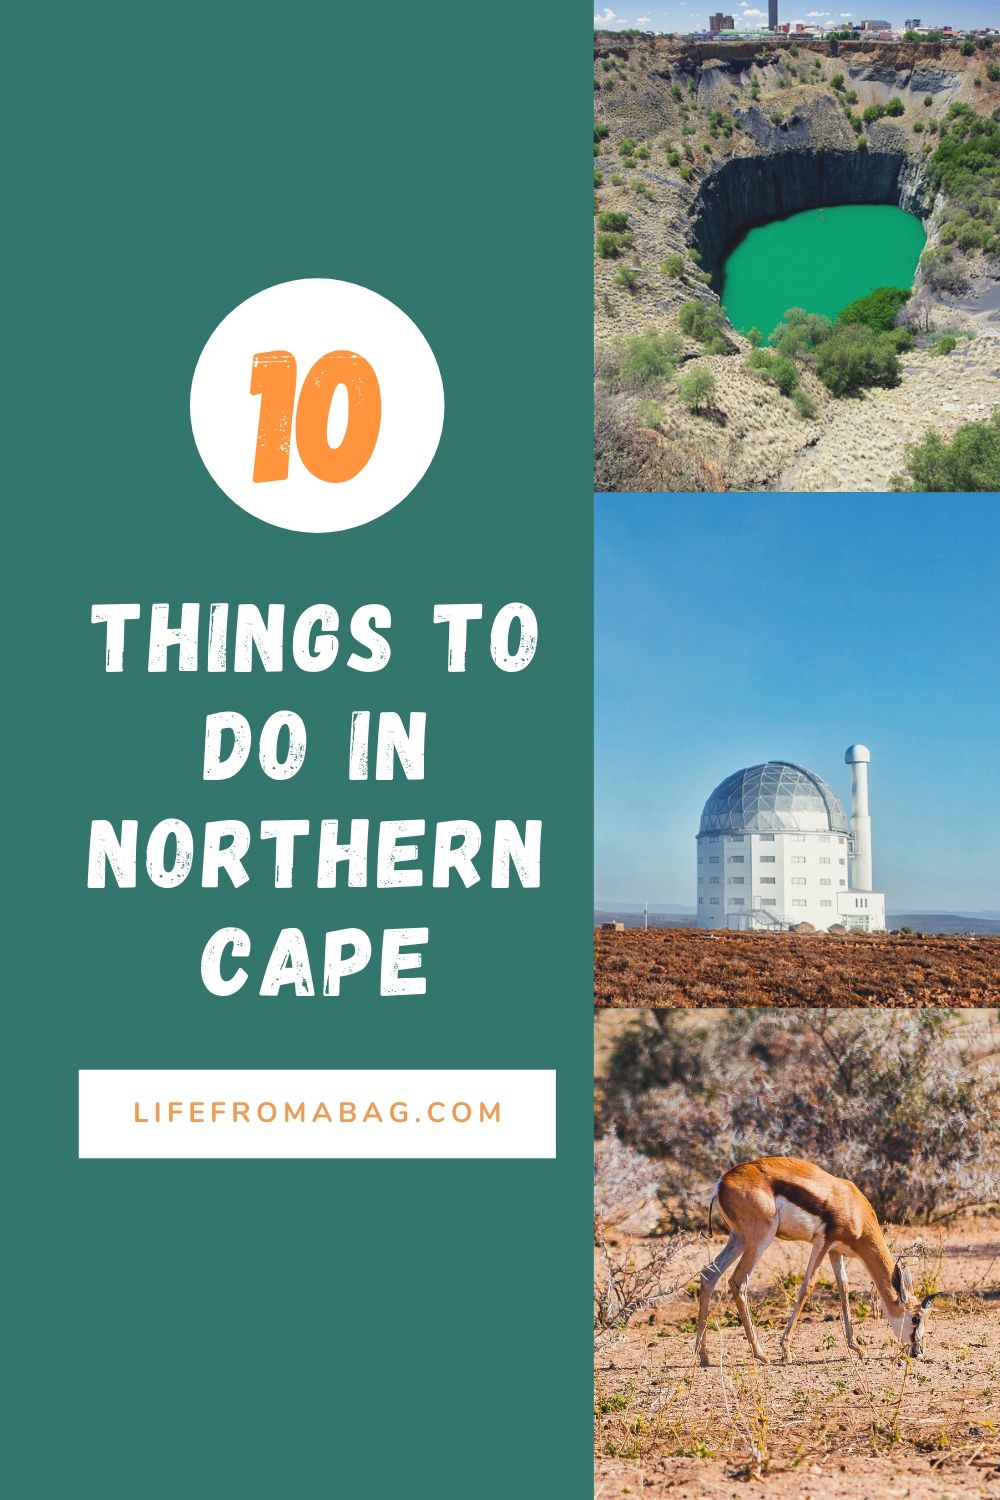 Things to do in Northern Cape